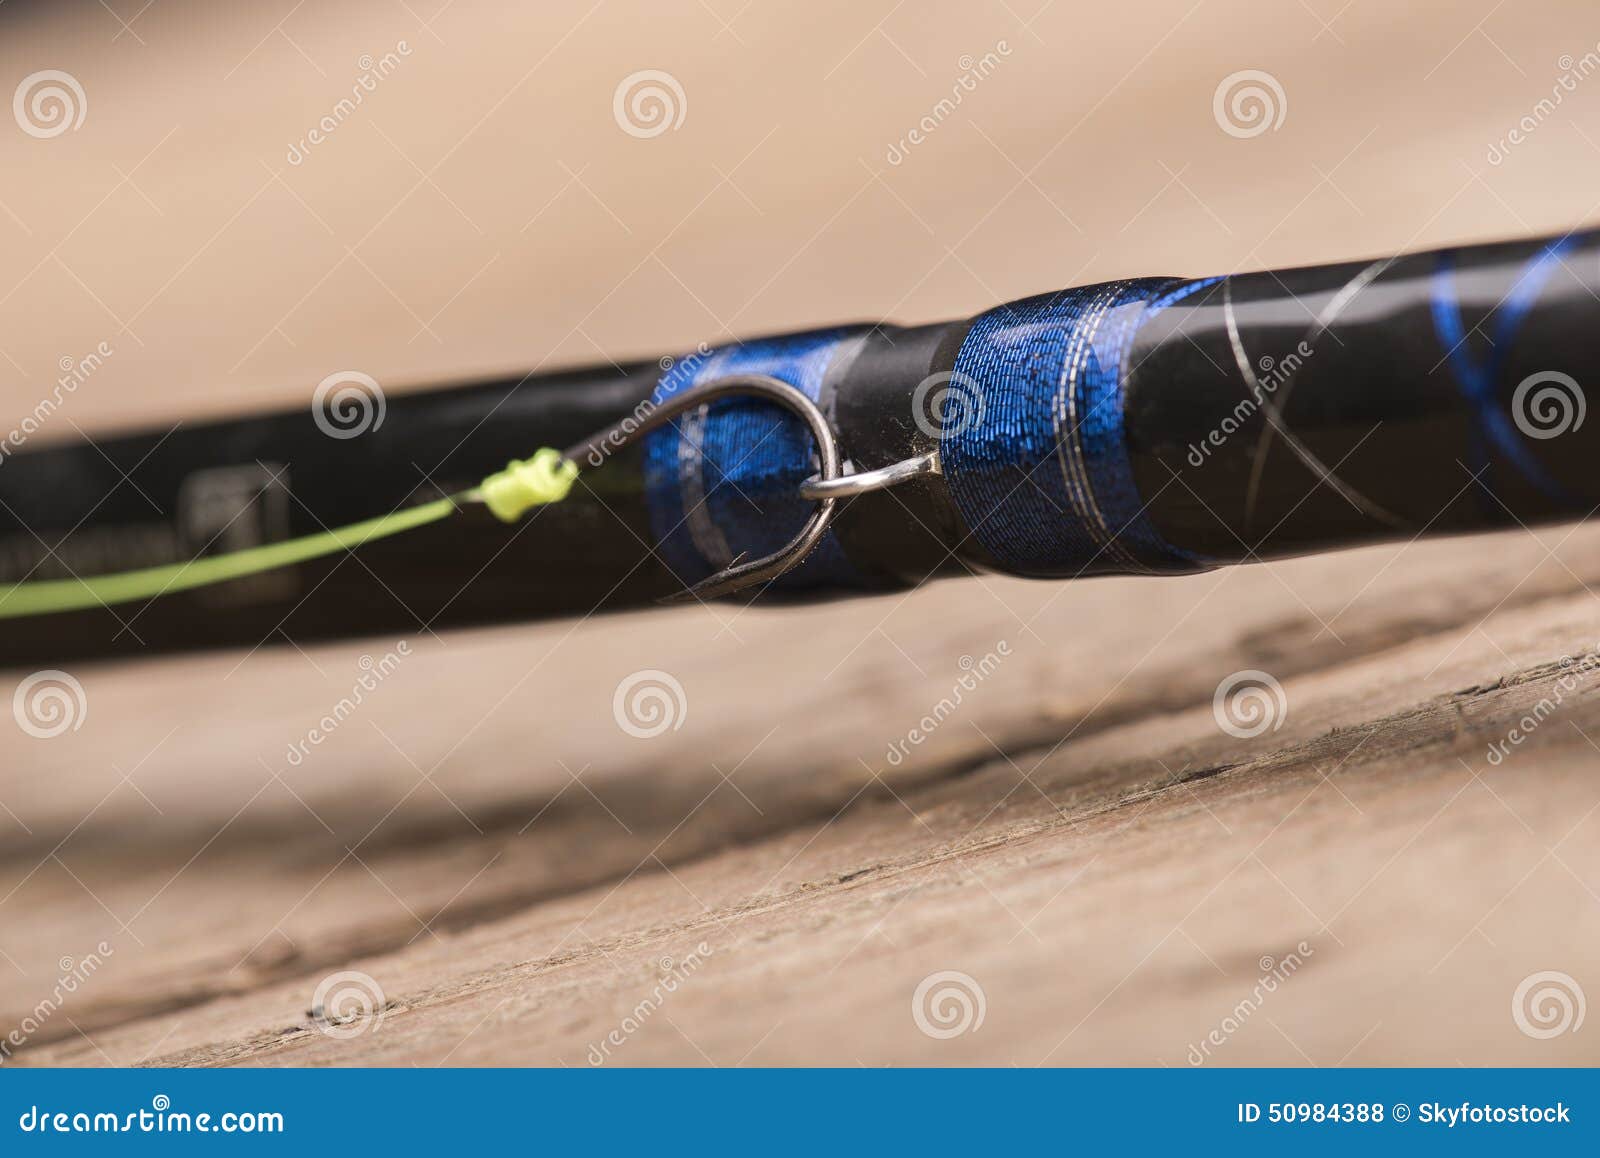 Fishing hook and line stock photo. Image of object, barb - 50984388